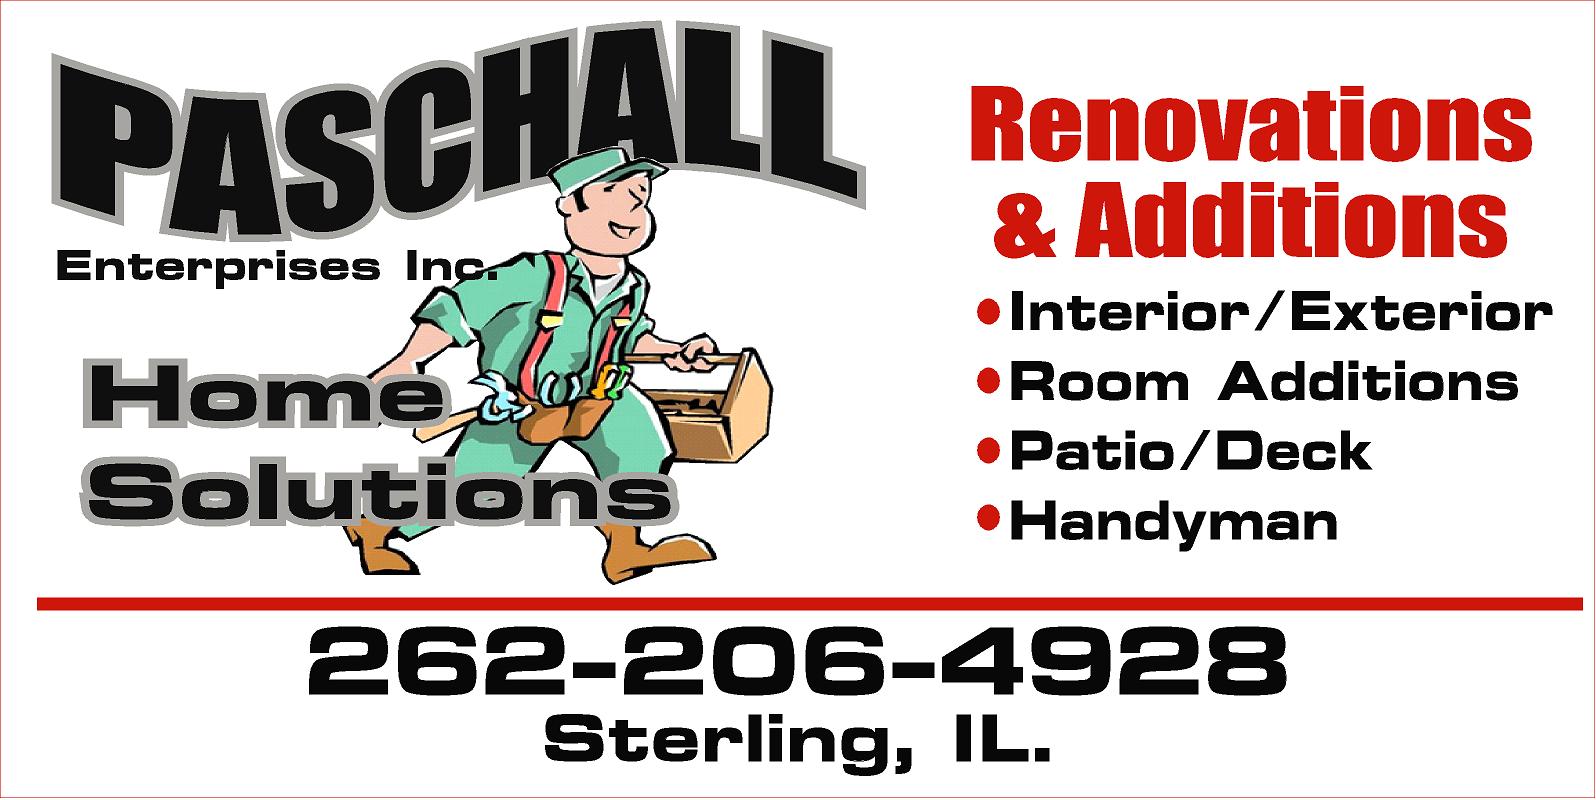 Paschall Enterprises Inc- Home Solutions Sign and Logo wth  Services  Listed to include Renovations and Additions